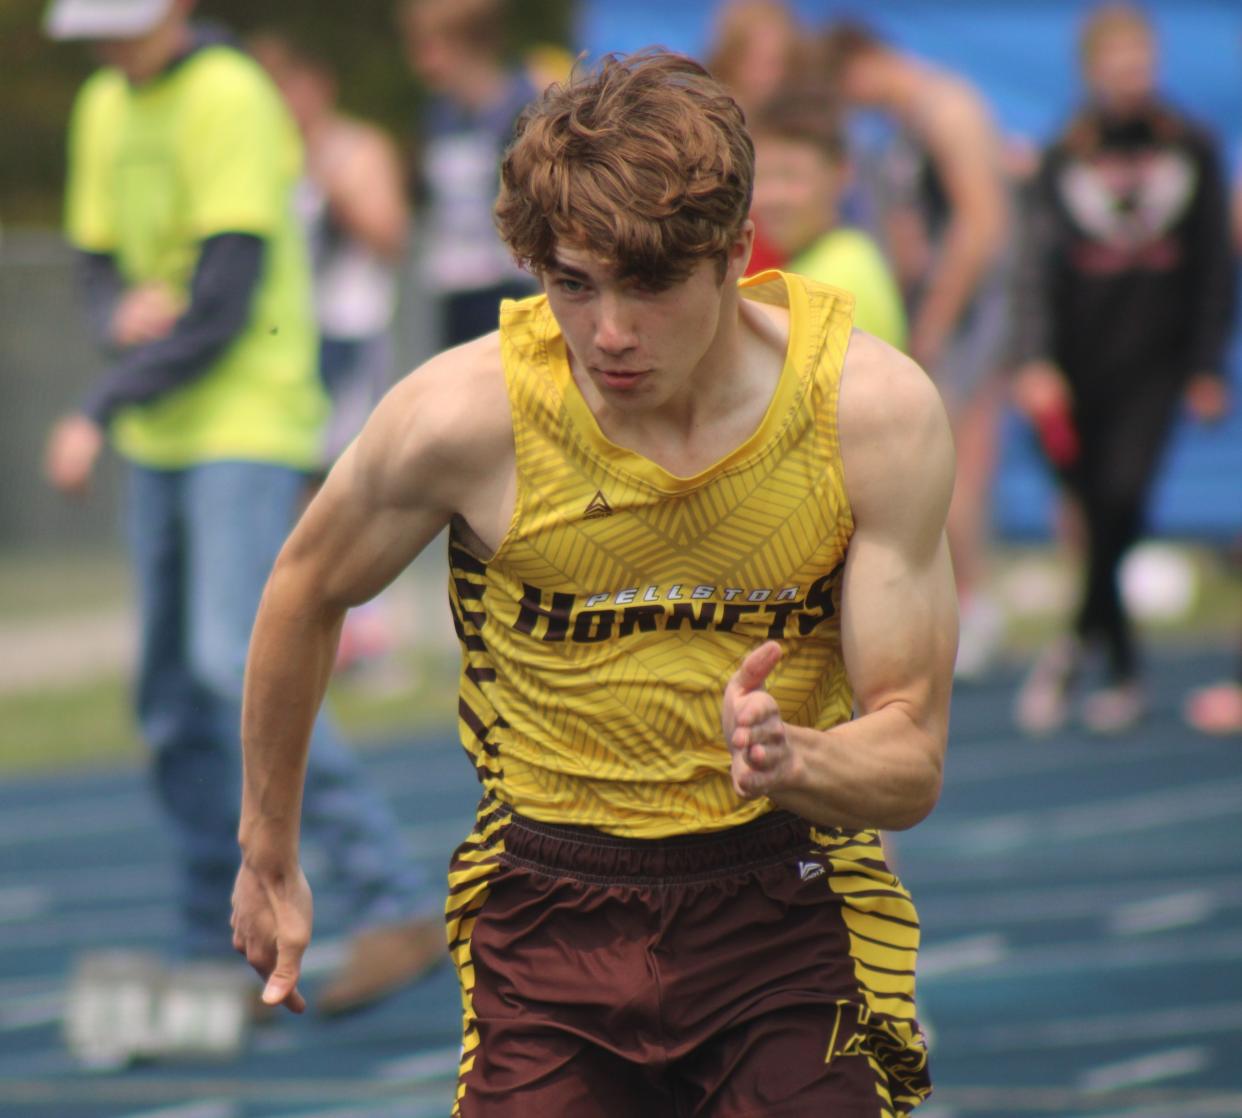 Laith Griffith has thrived as a sprinter during his career with the Pellston track and field program.